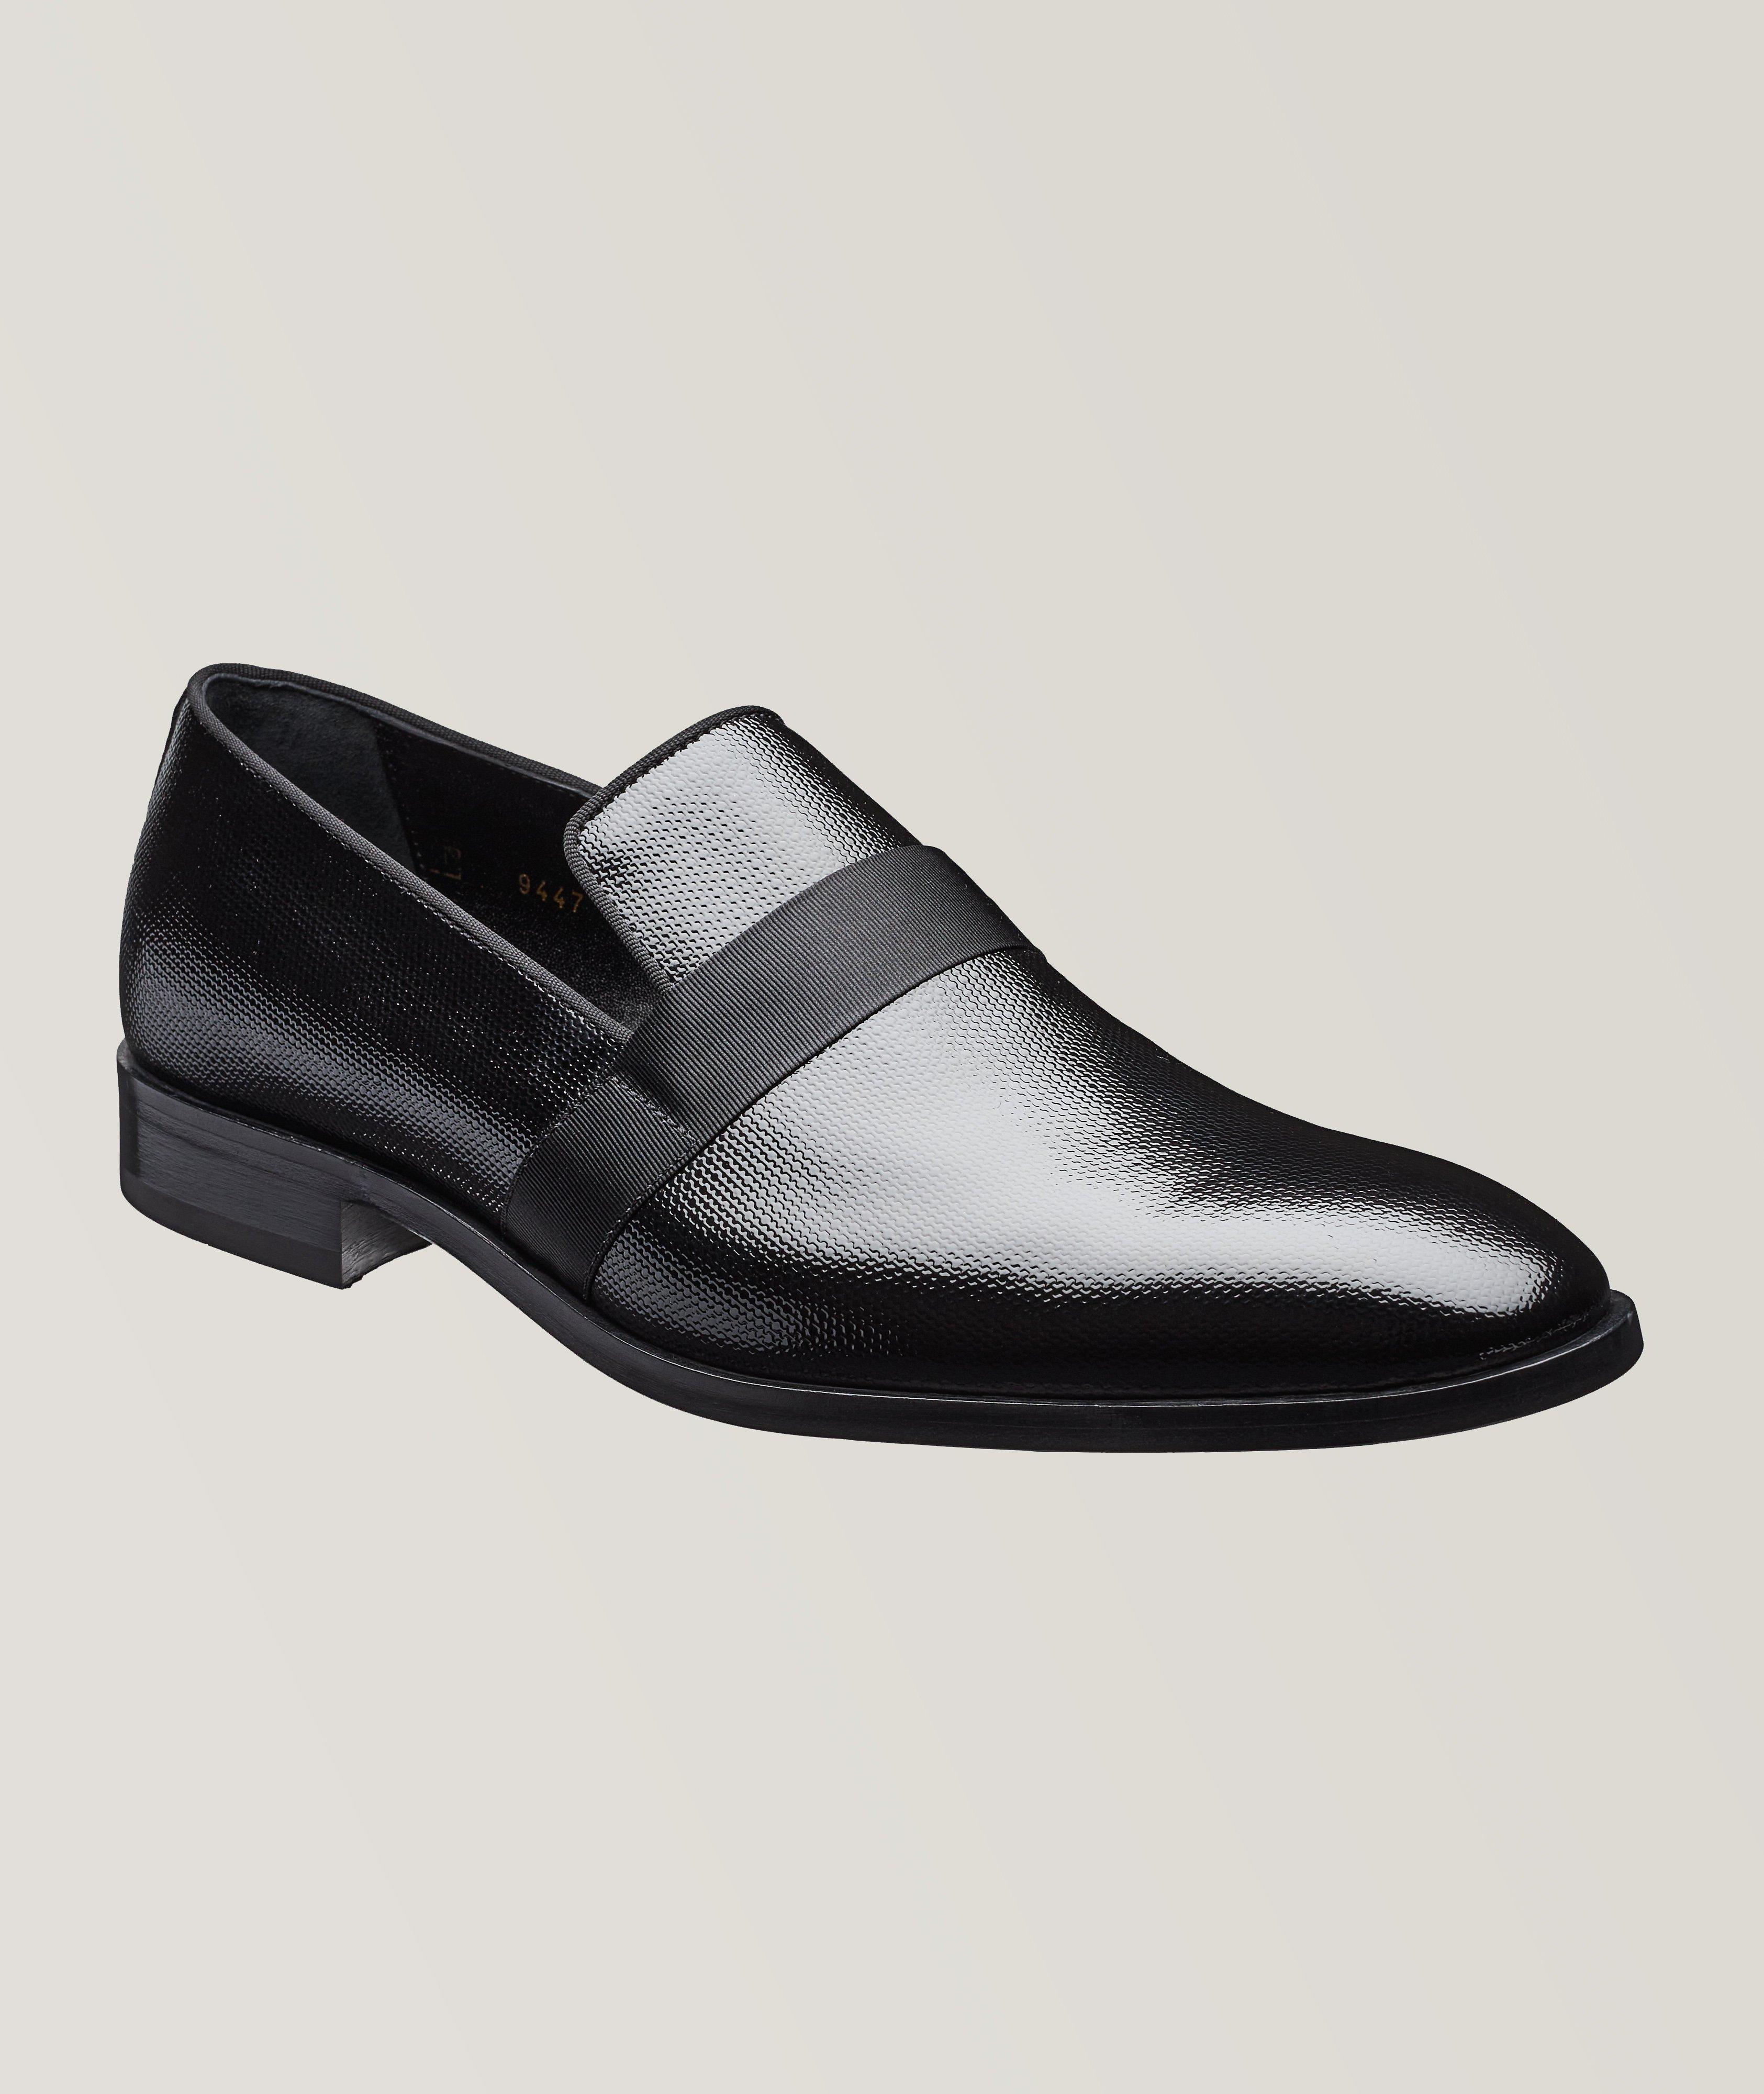 Patent Leather Grosgrain Loafer image 0